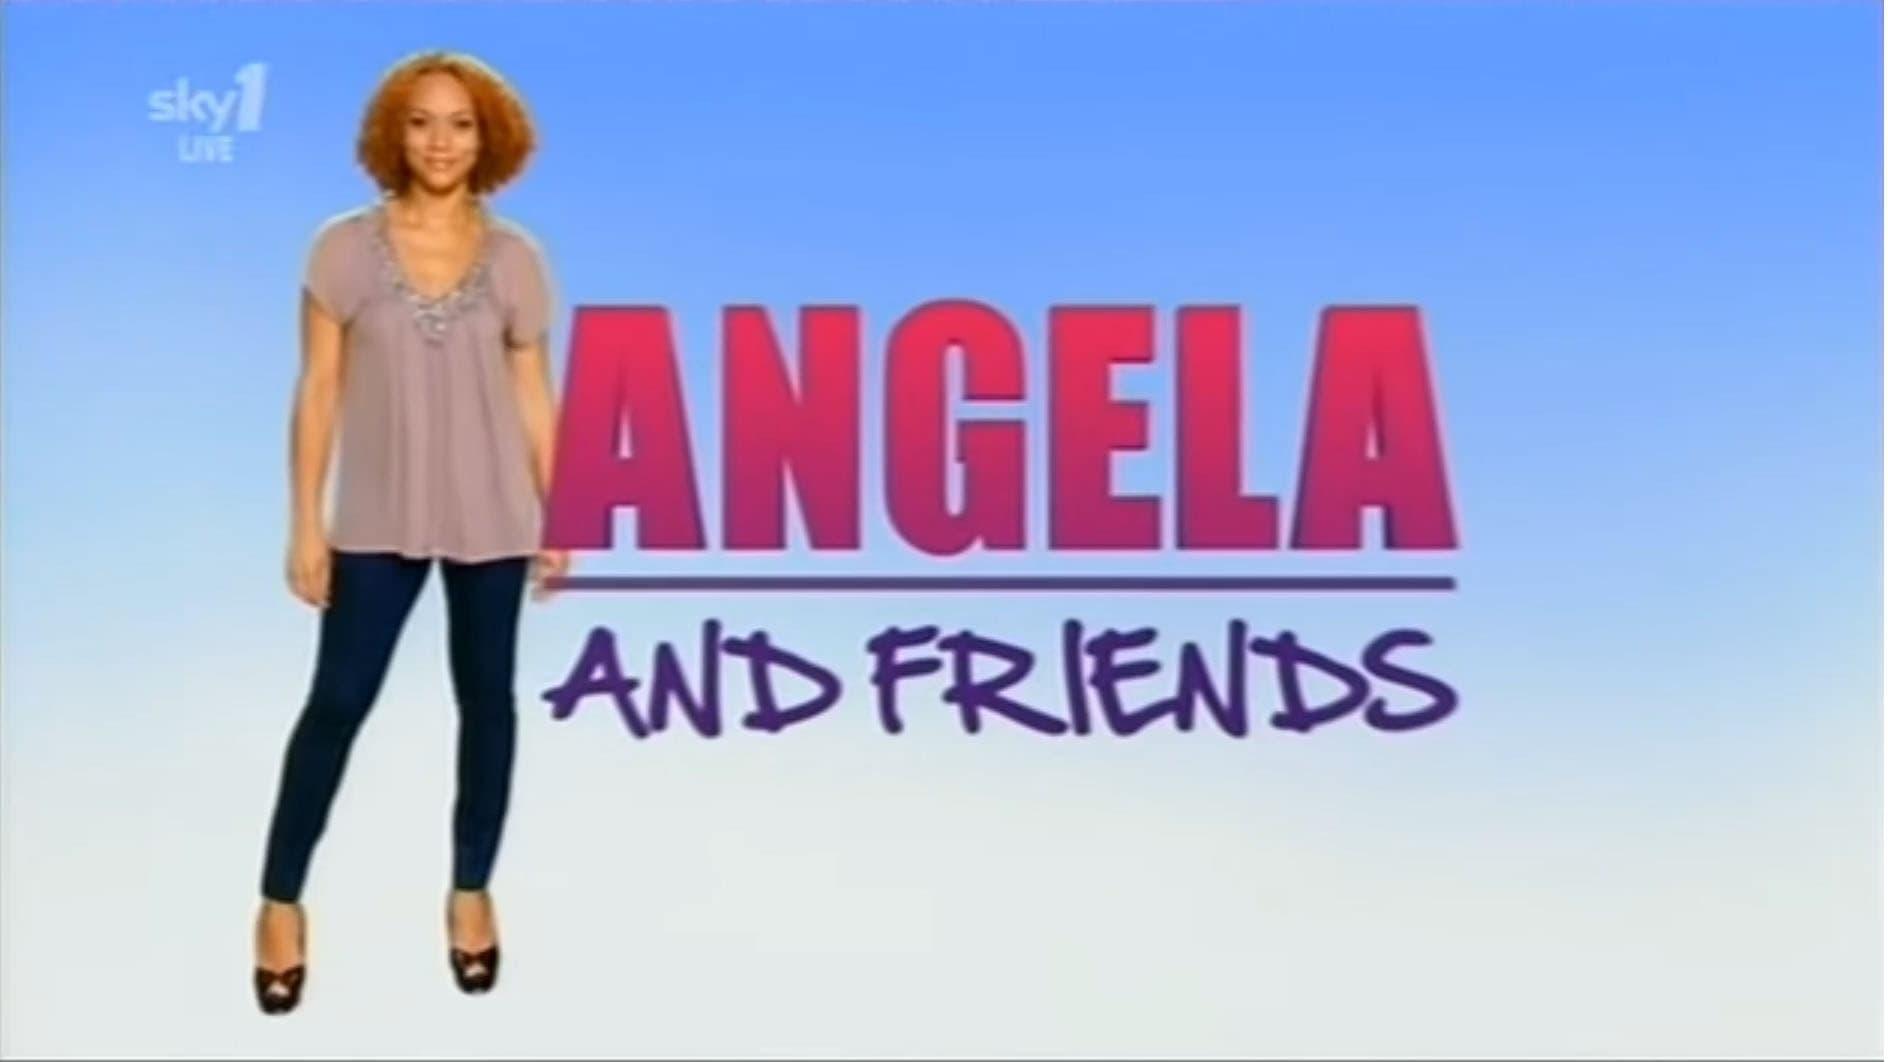 Angela and Friends backdrop